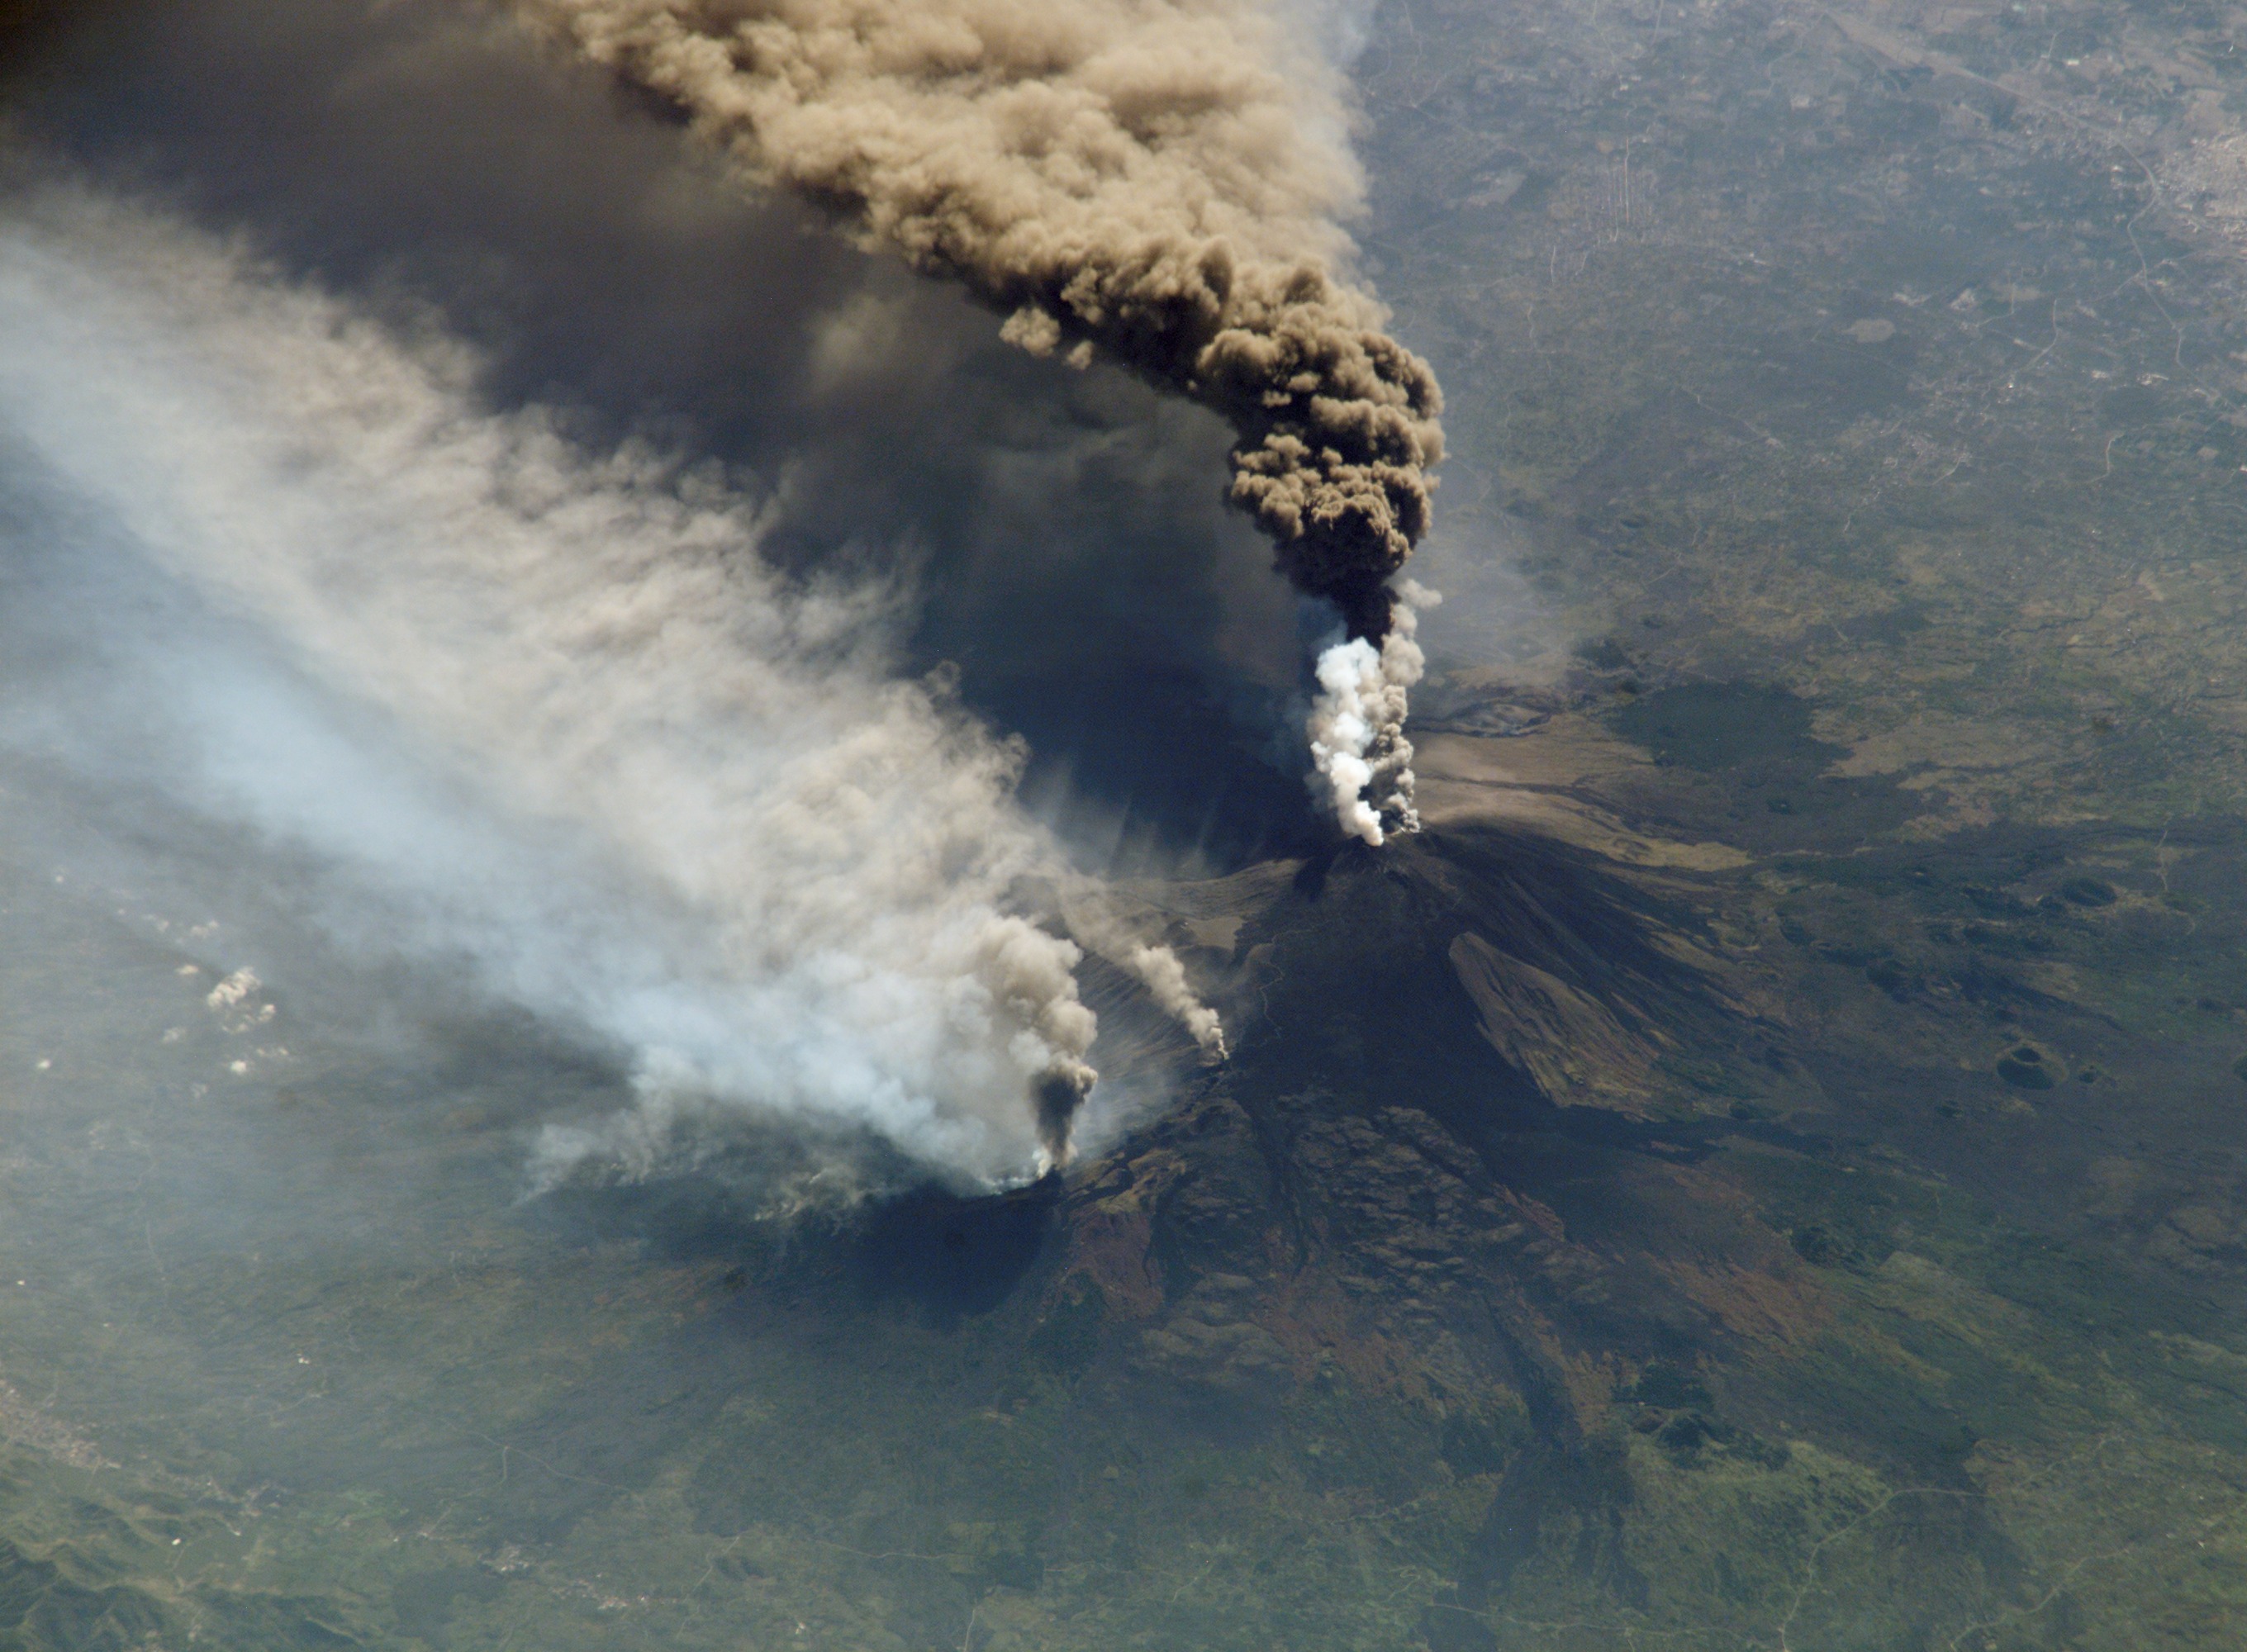 As Volcanoes Erupt Worldwide, Scientists Say Climate is Changing Expectations